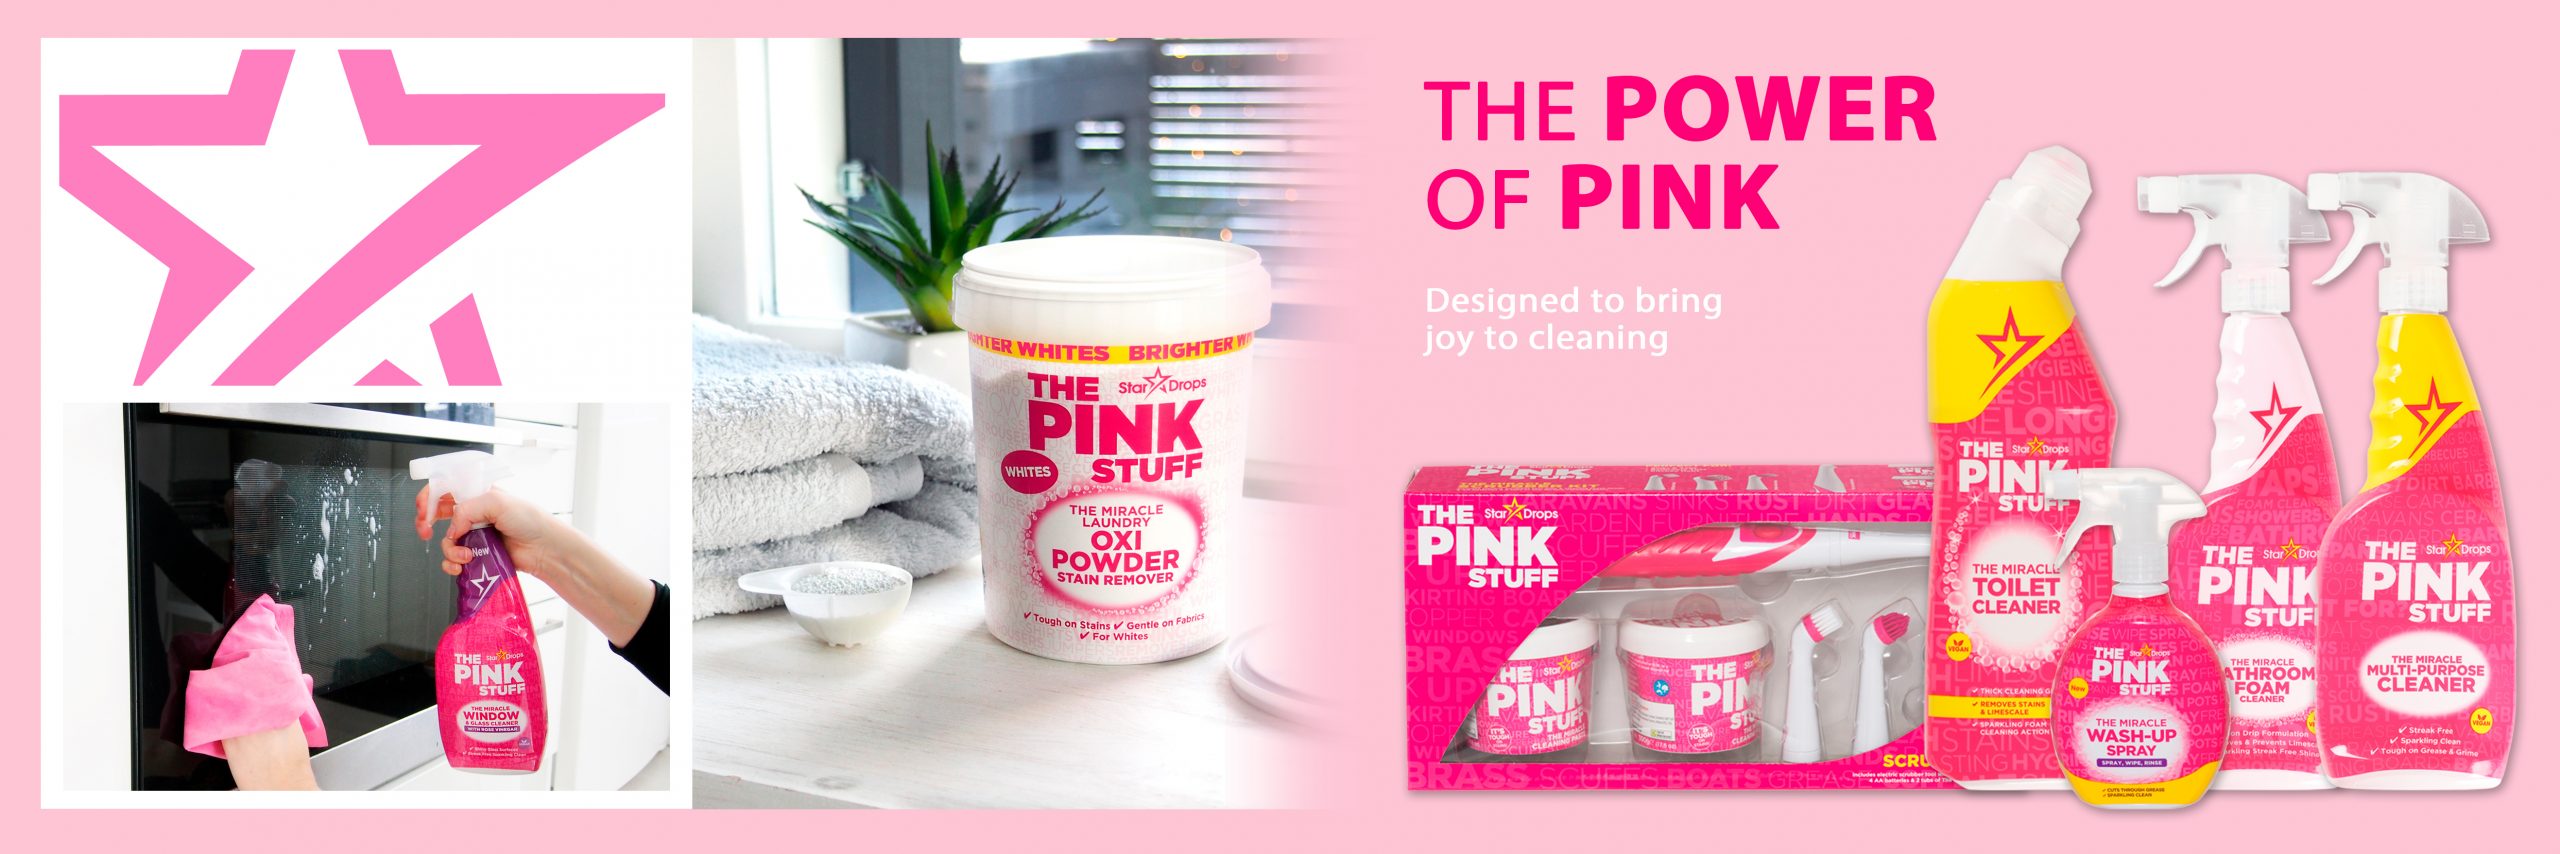 The Pink Stuff - Tammer Brands